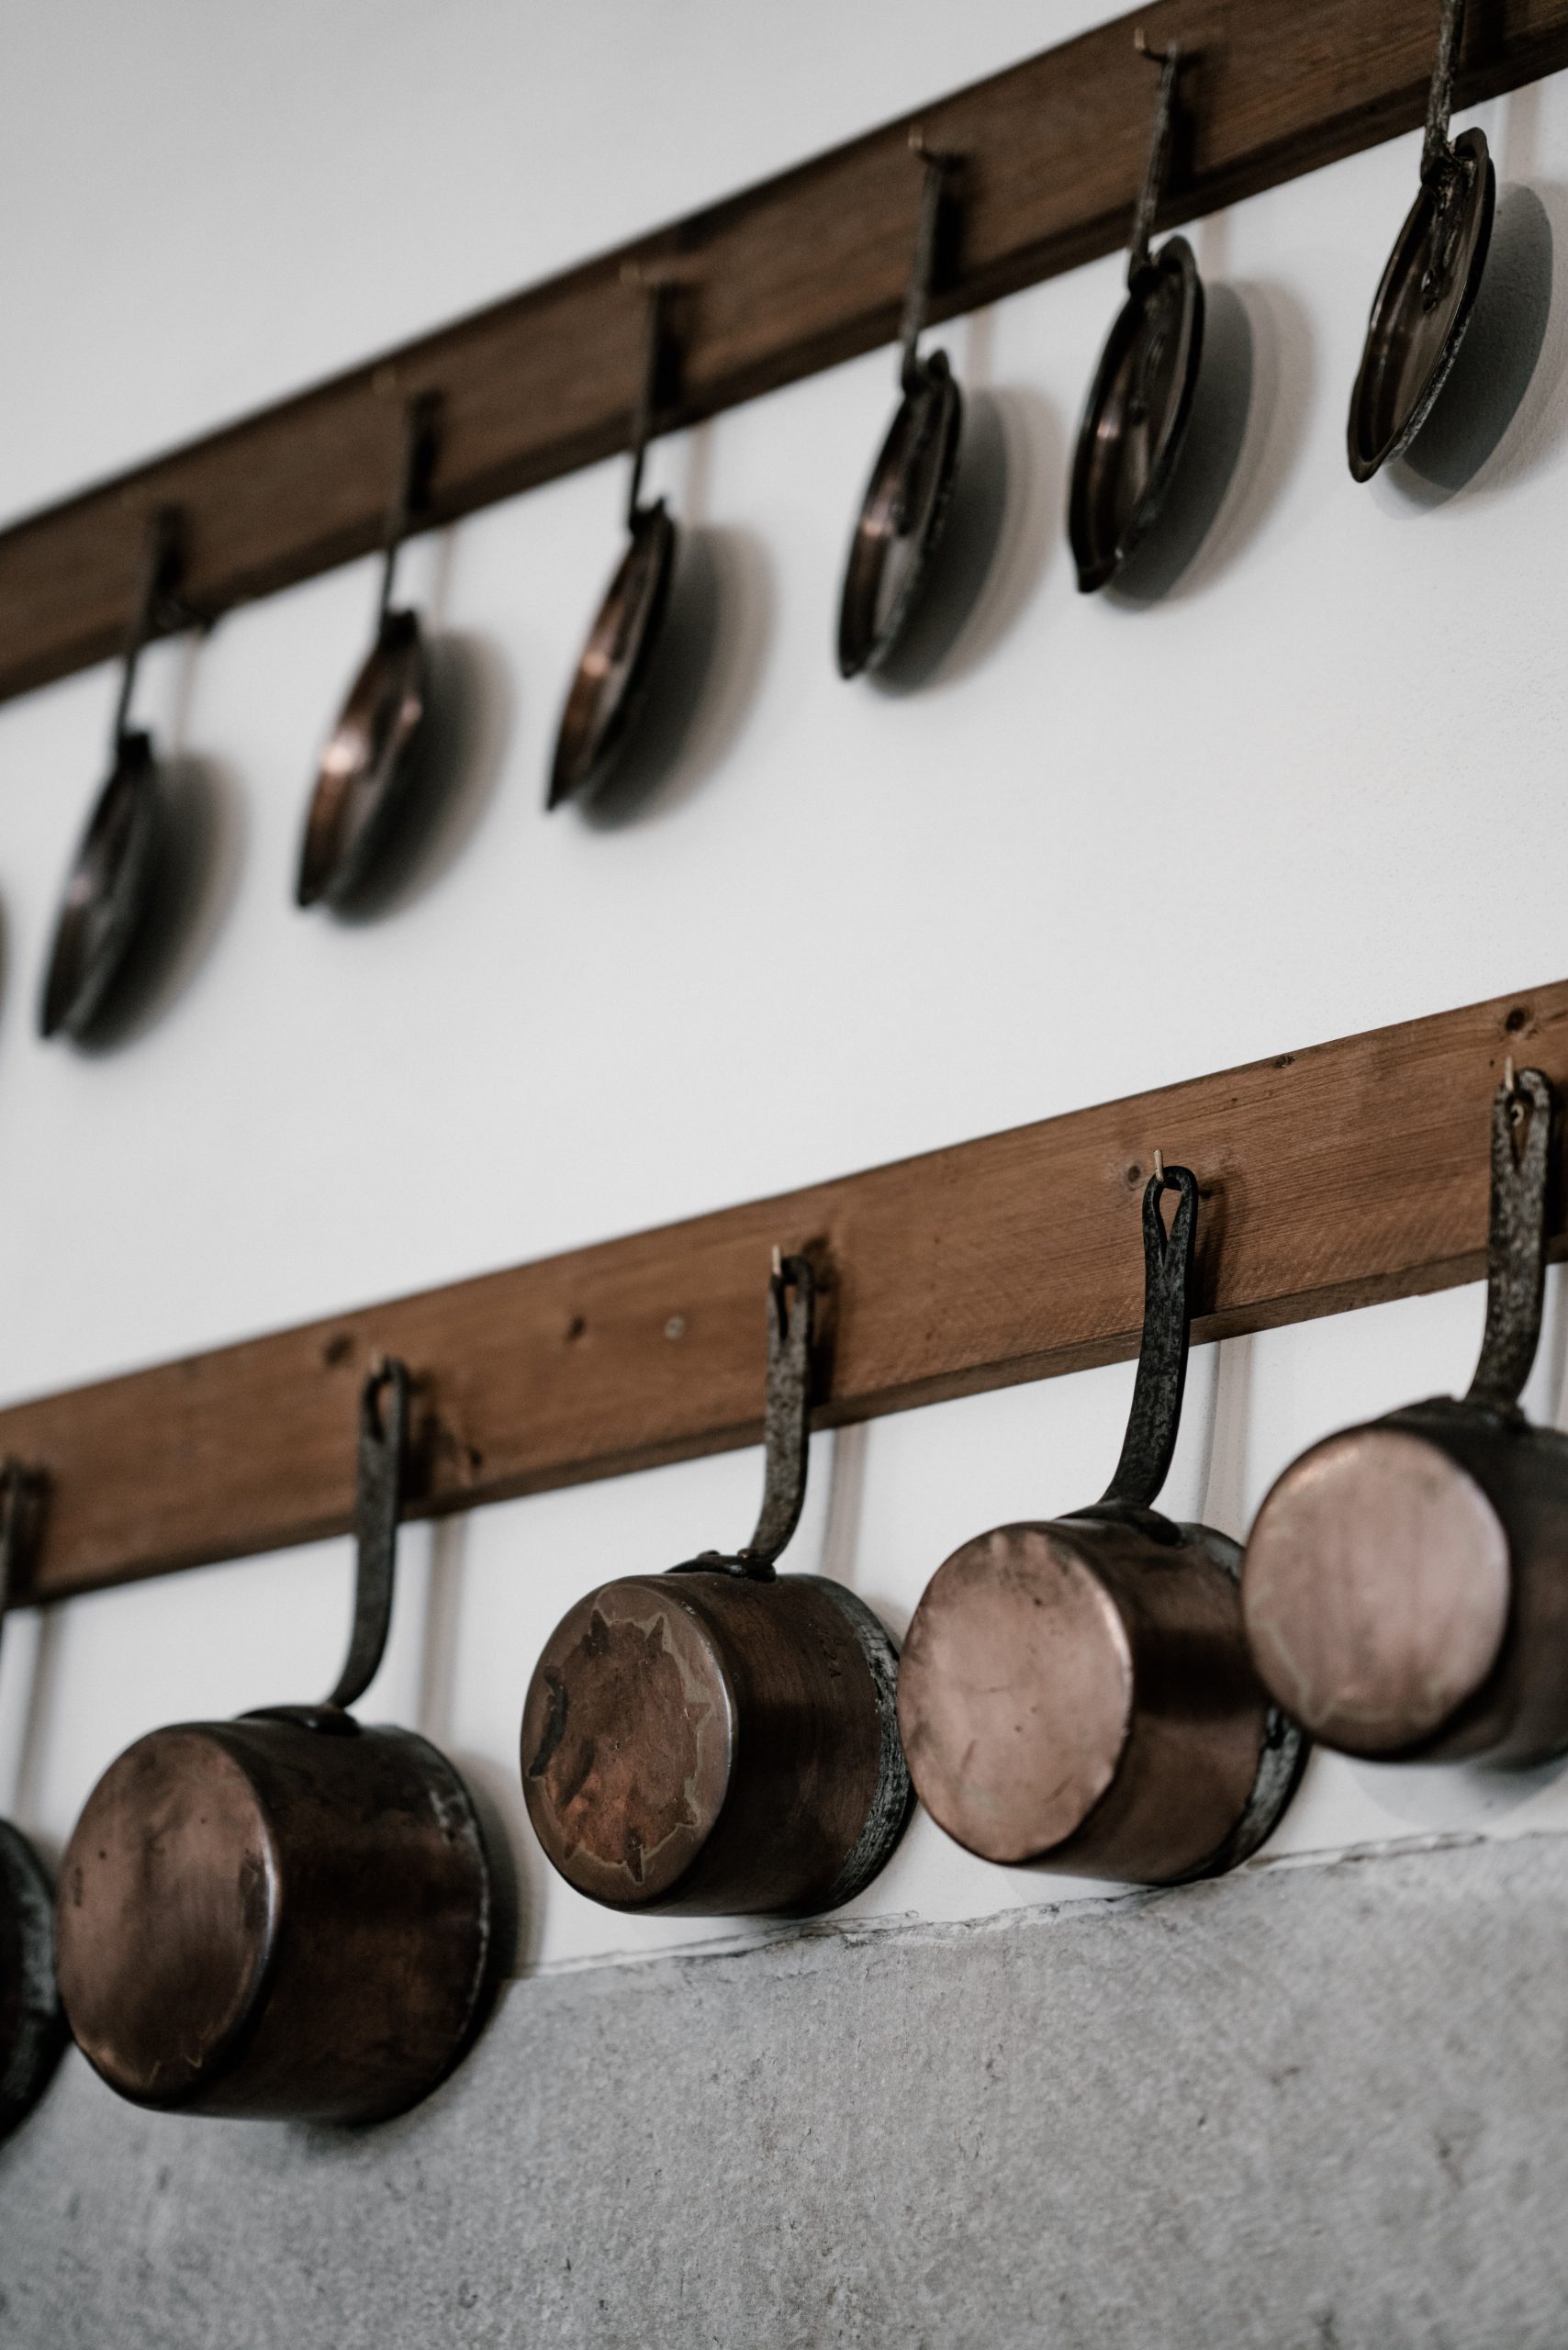 https://www.cookly.me/magazine/wp-content/uploads/2022/06/hanging-saucepans-scaled.jpg